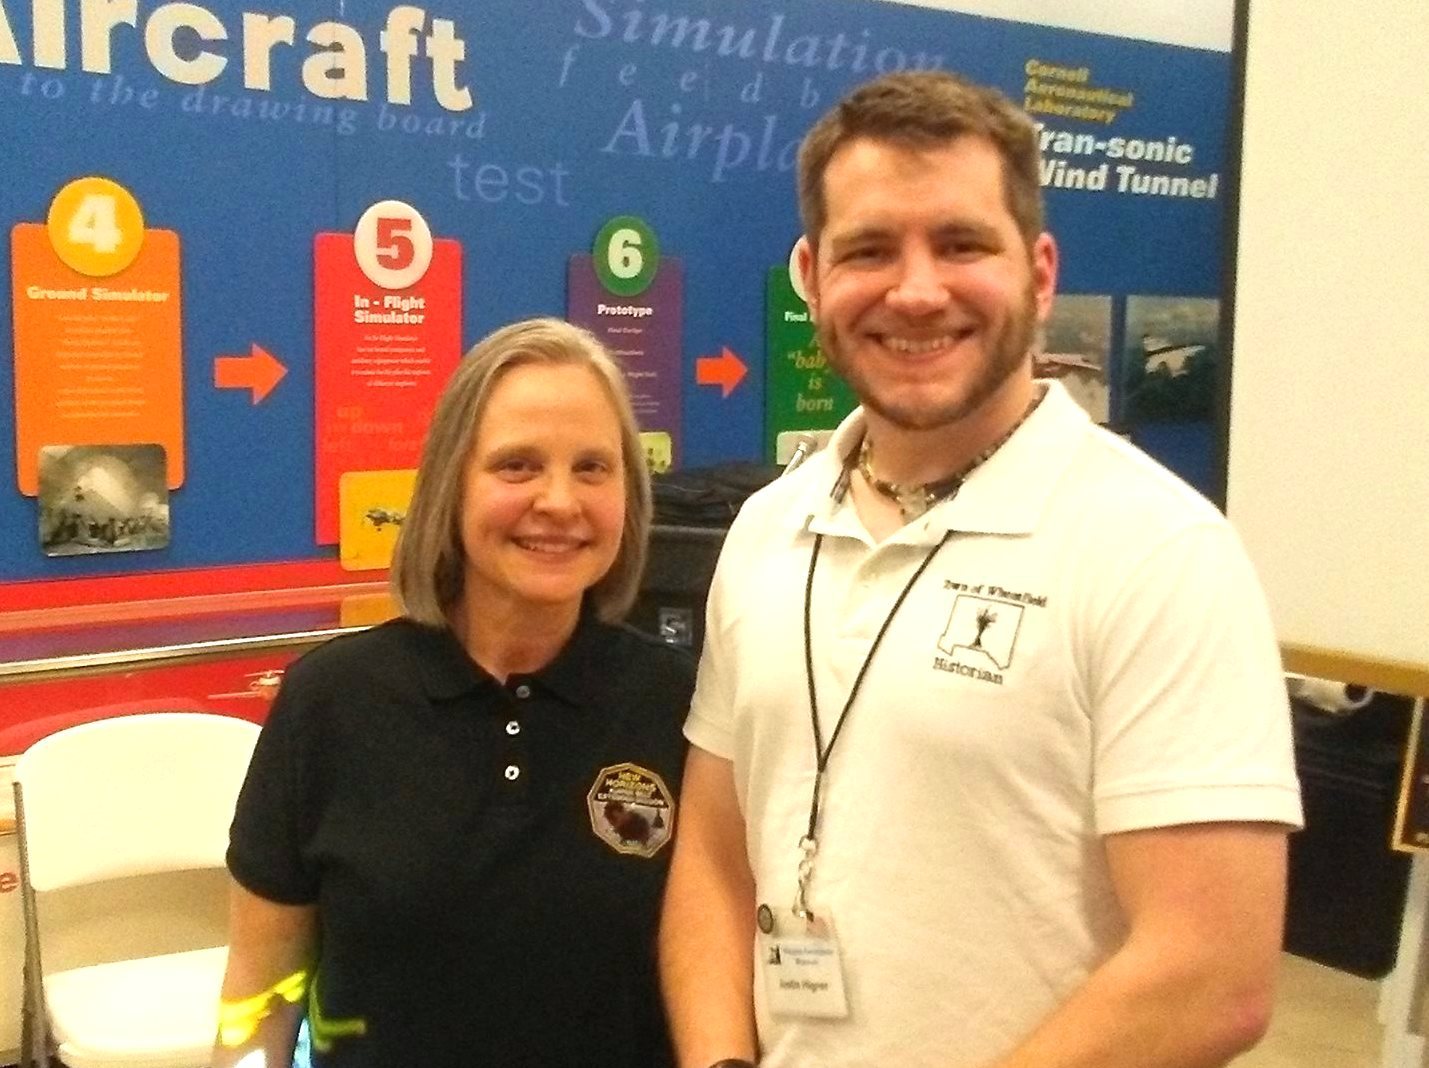 From left, Alice Bowman and Town of Wheatfield Historian Justin Higner pose following a presentation by Bowman at the Niagara Aerospace Museum. (Submitted photo)